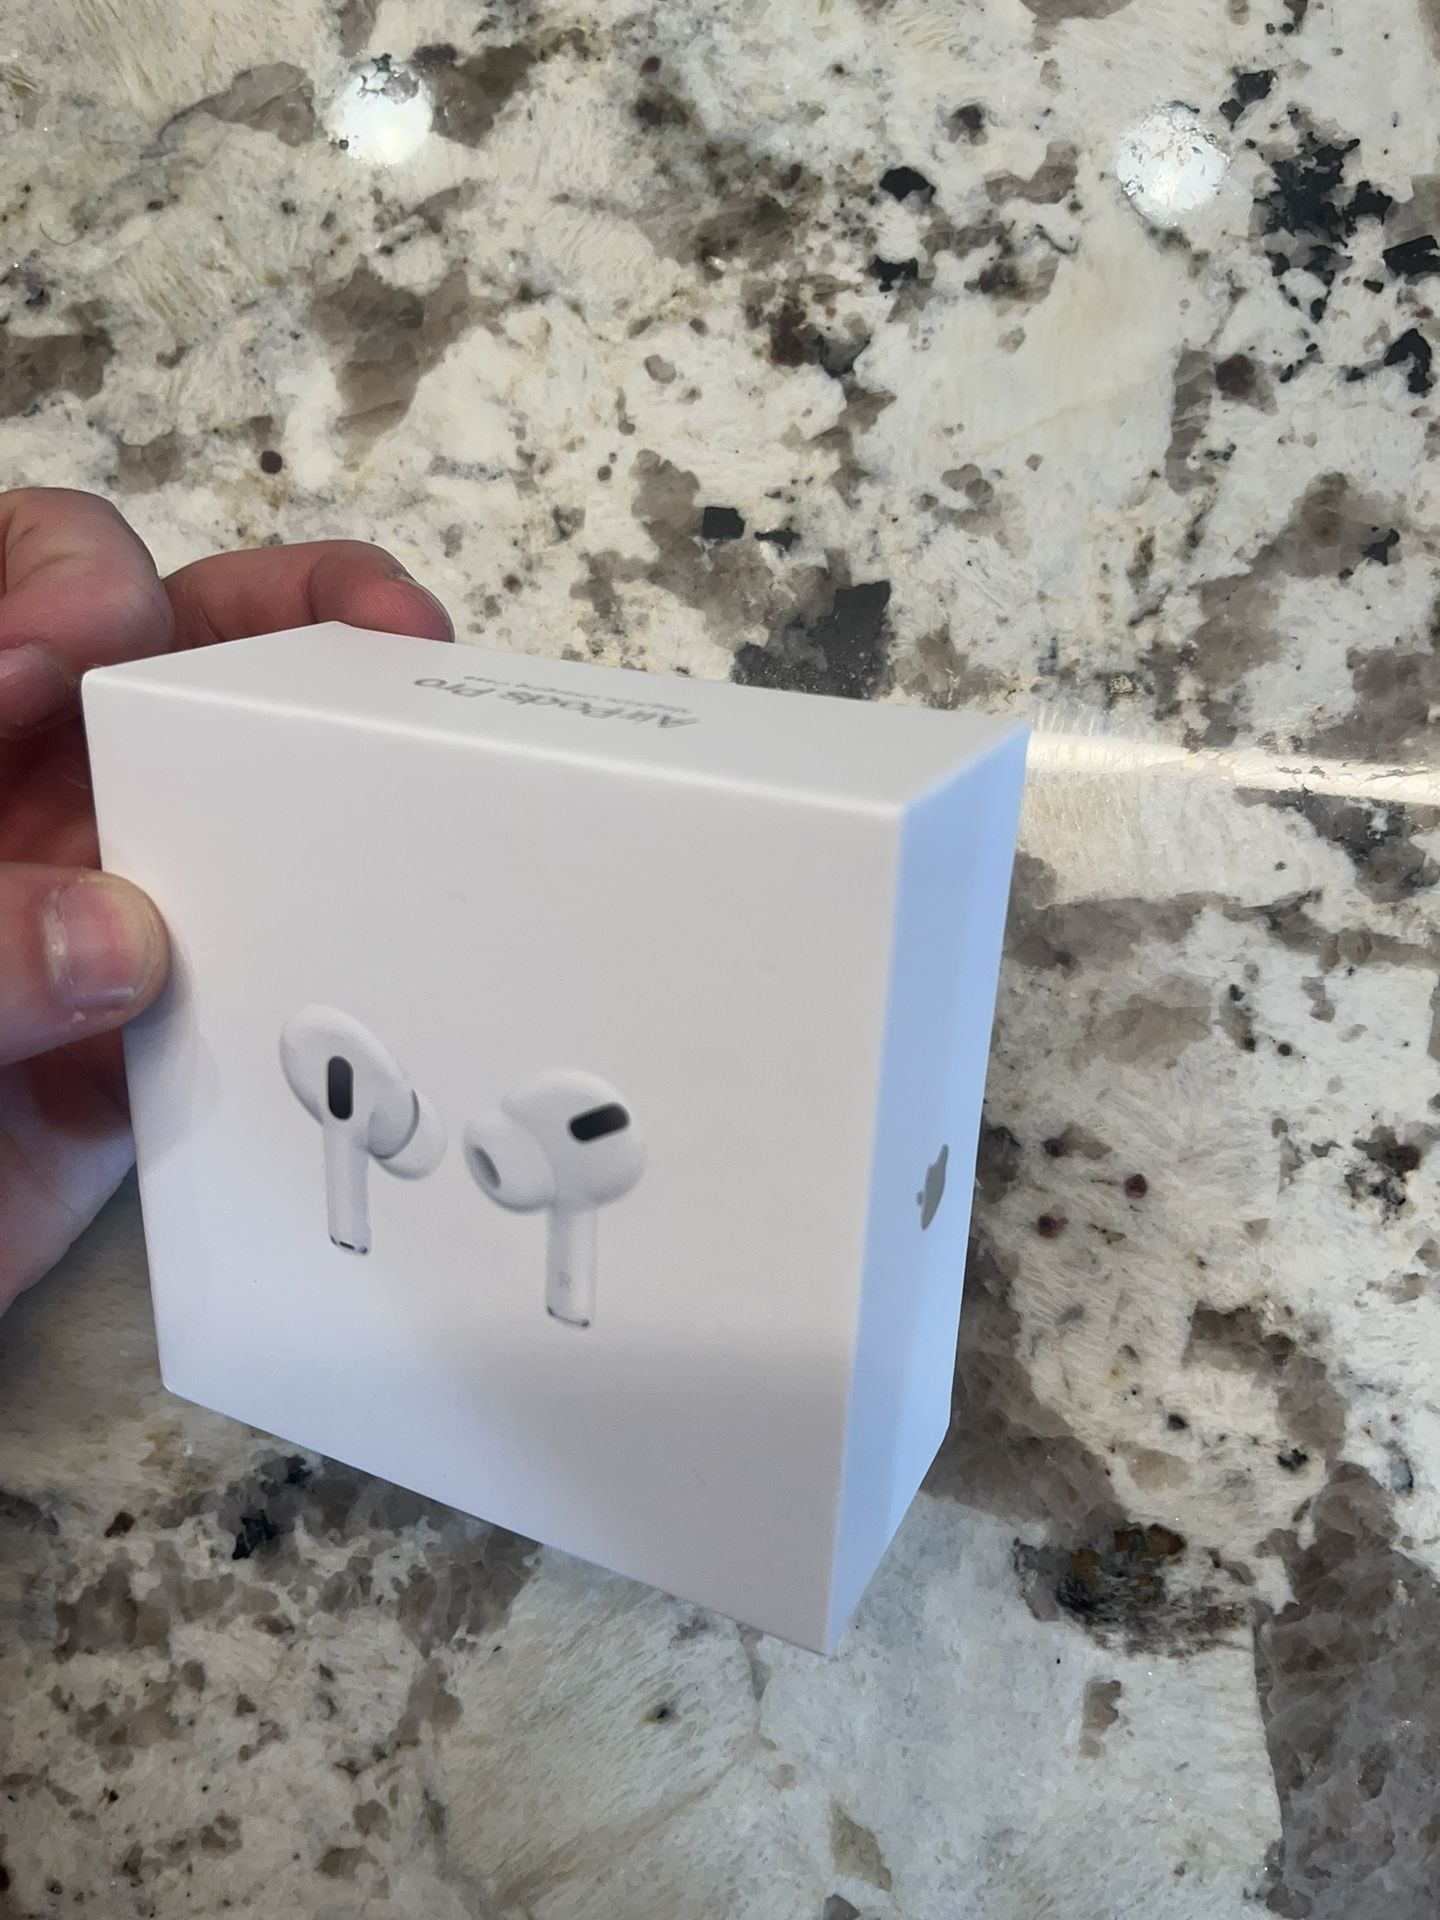 BEST OFFER airpod Pros Brand New